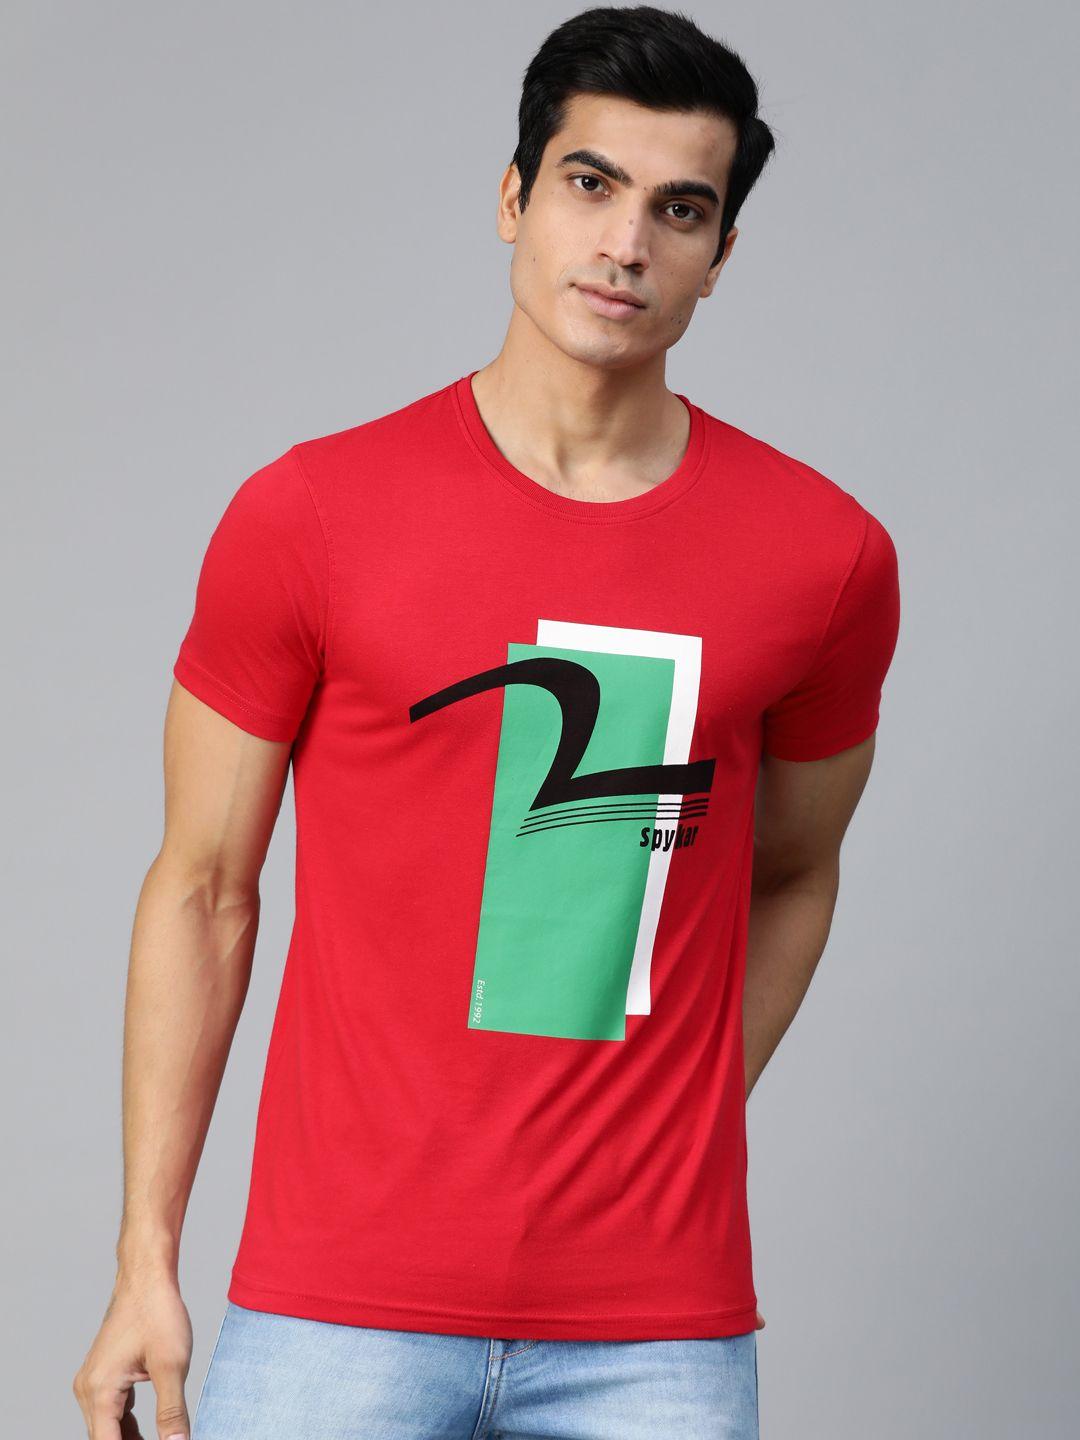 underjeans-by-spykar-men-red-&-green-printed-round-neck-t-shirt